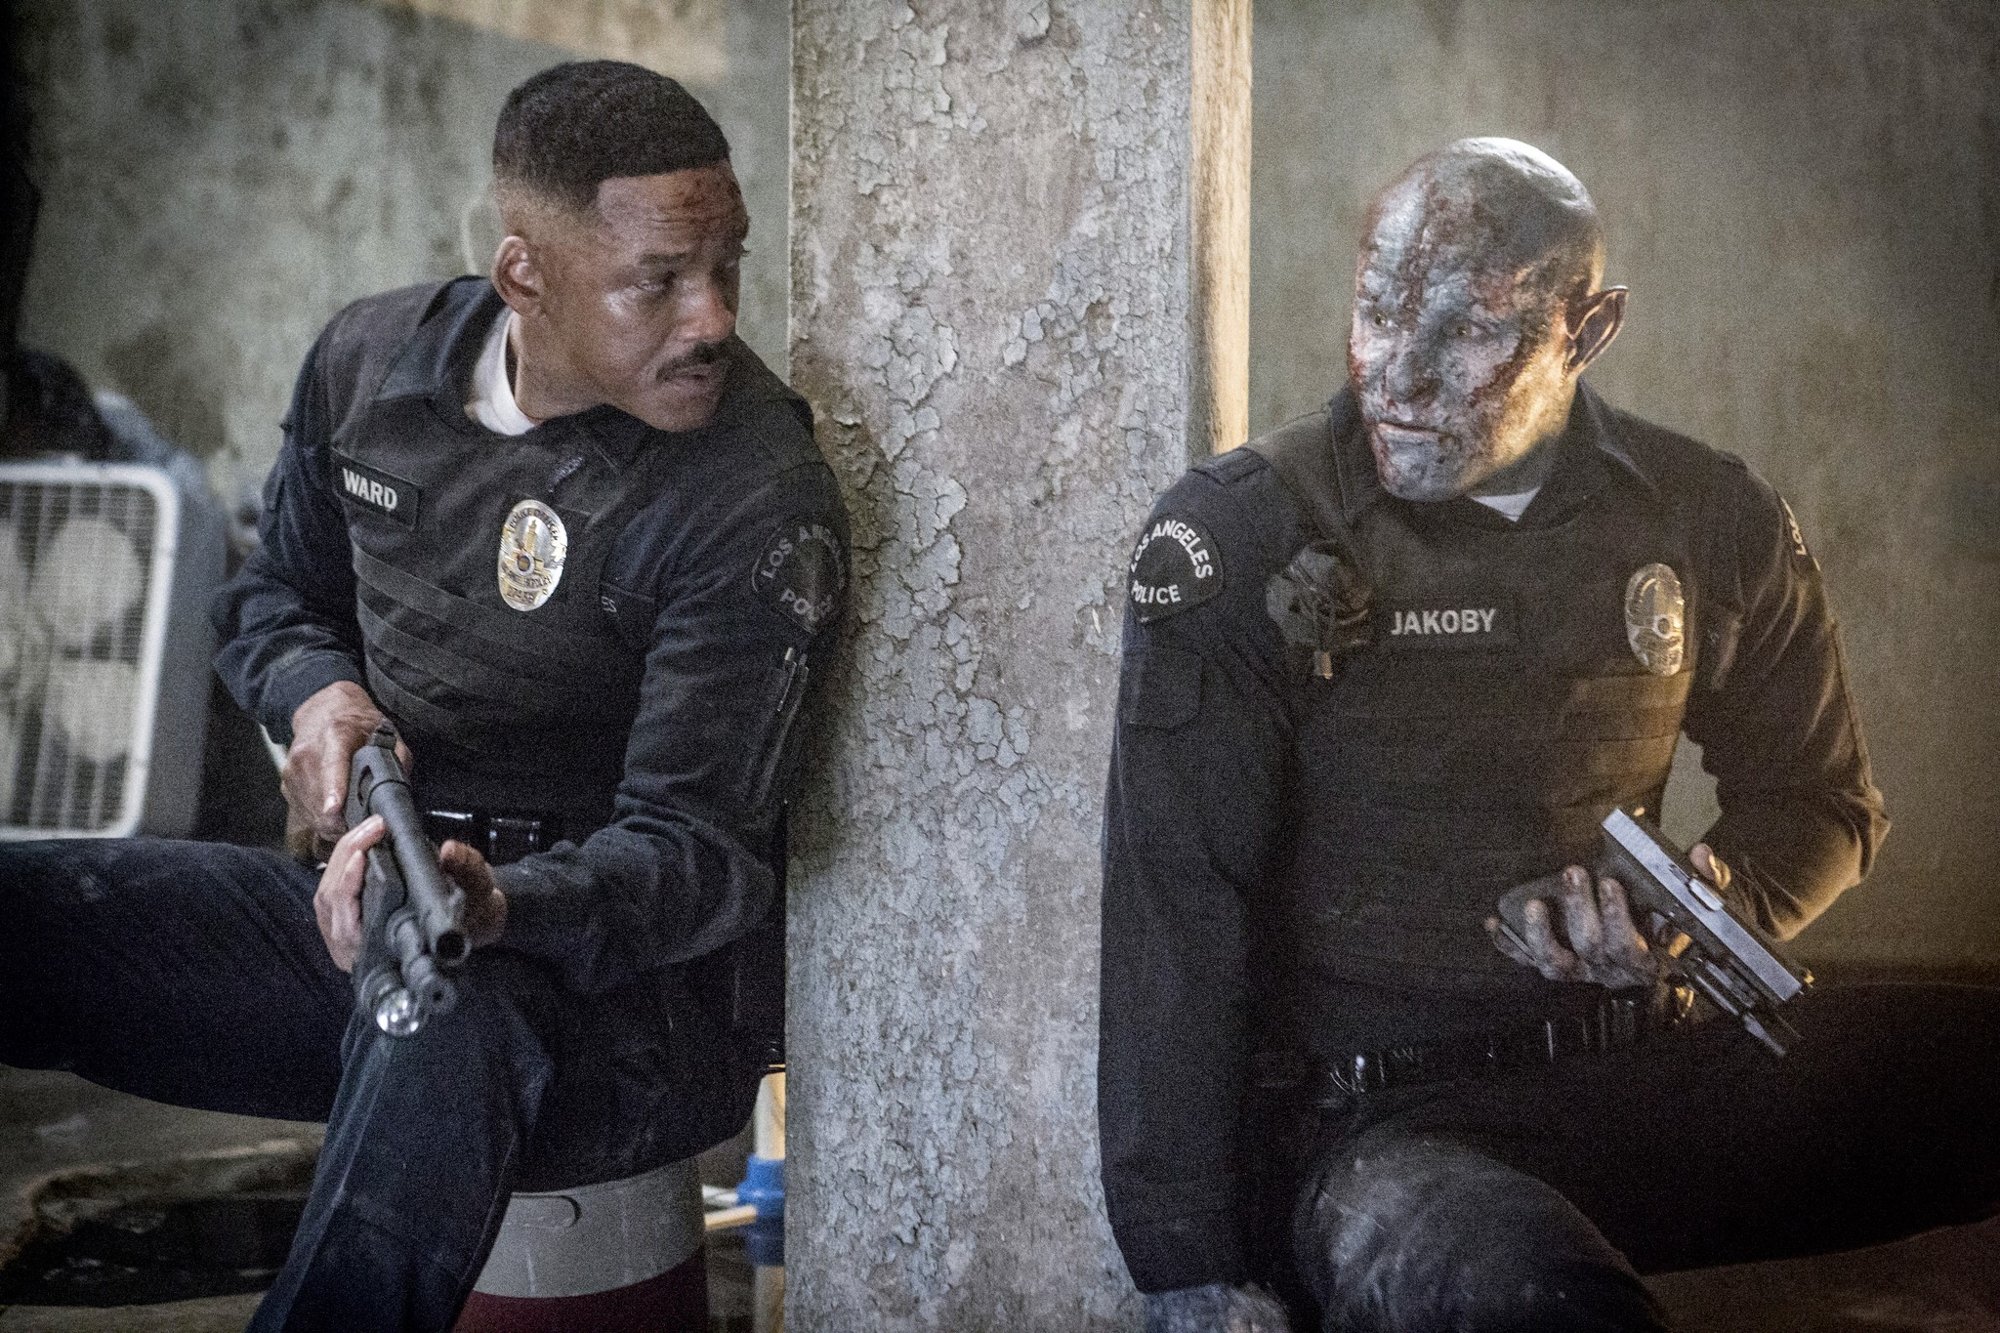 Will Smith stars as Daryl Ward and Joel Edgerton stars as Nick Jakoby in Netflix's Bright (2017)